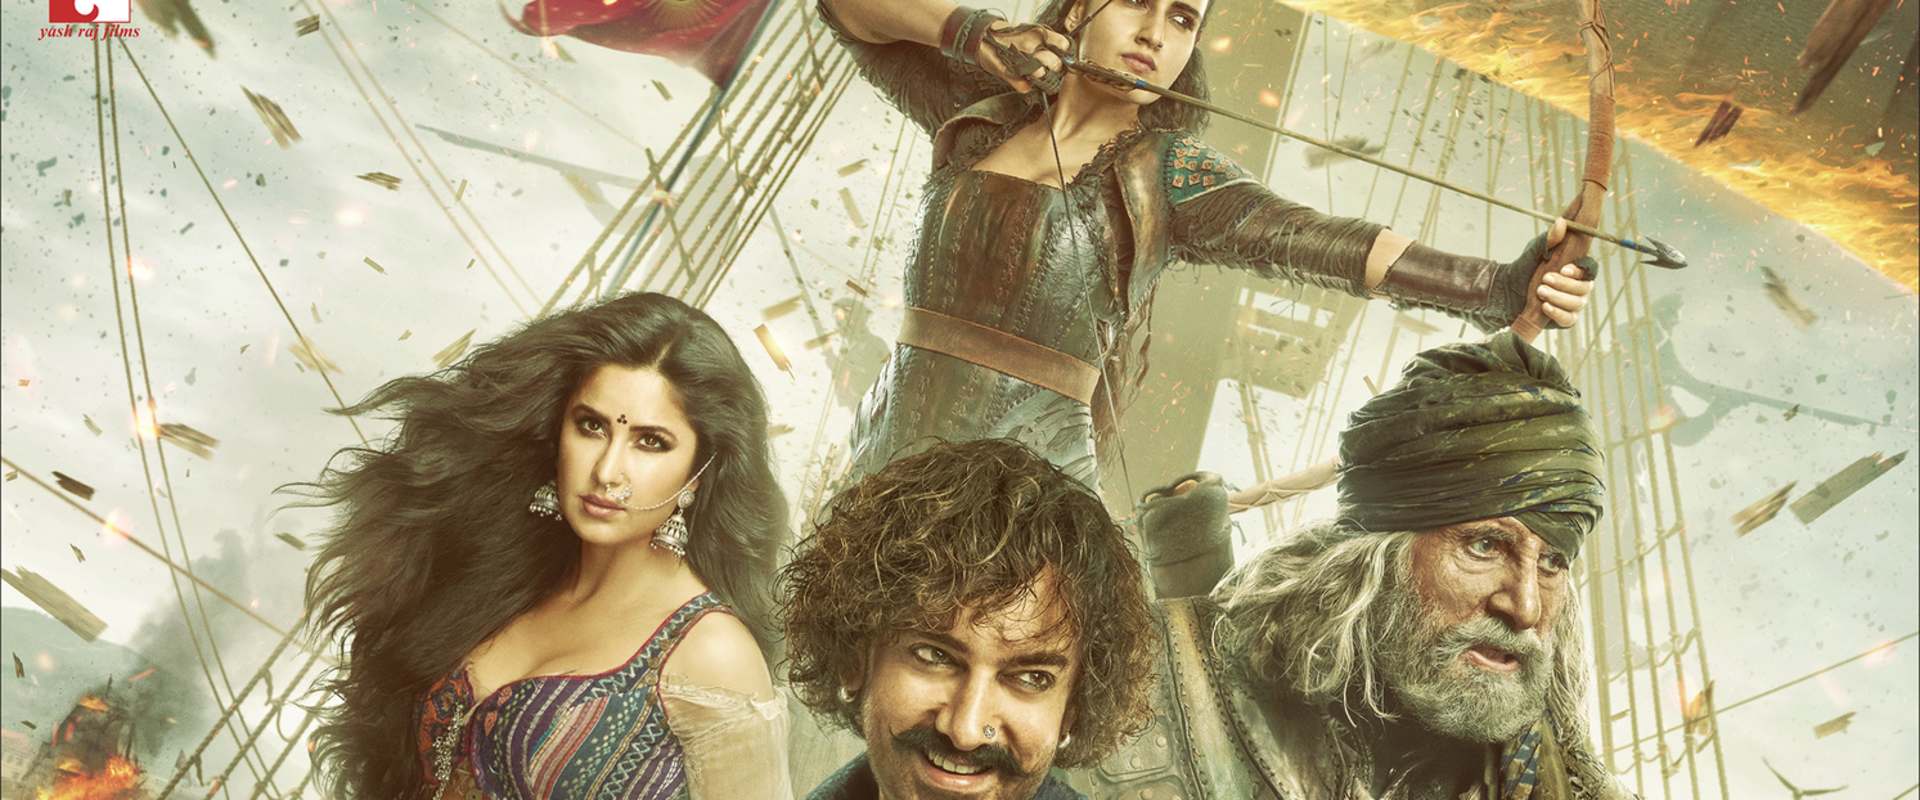 Thugs of Hindostan background 2